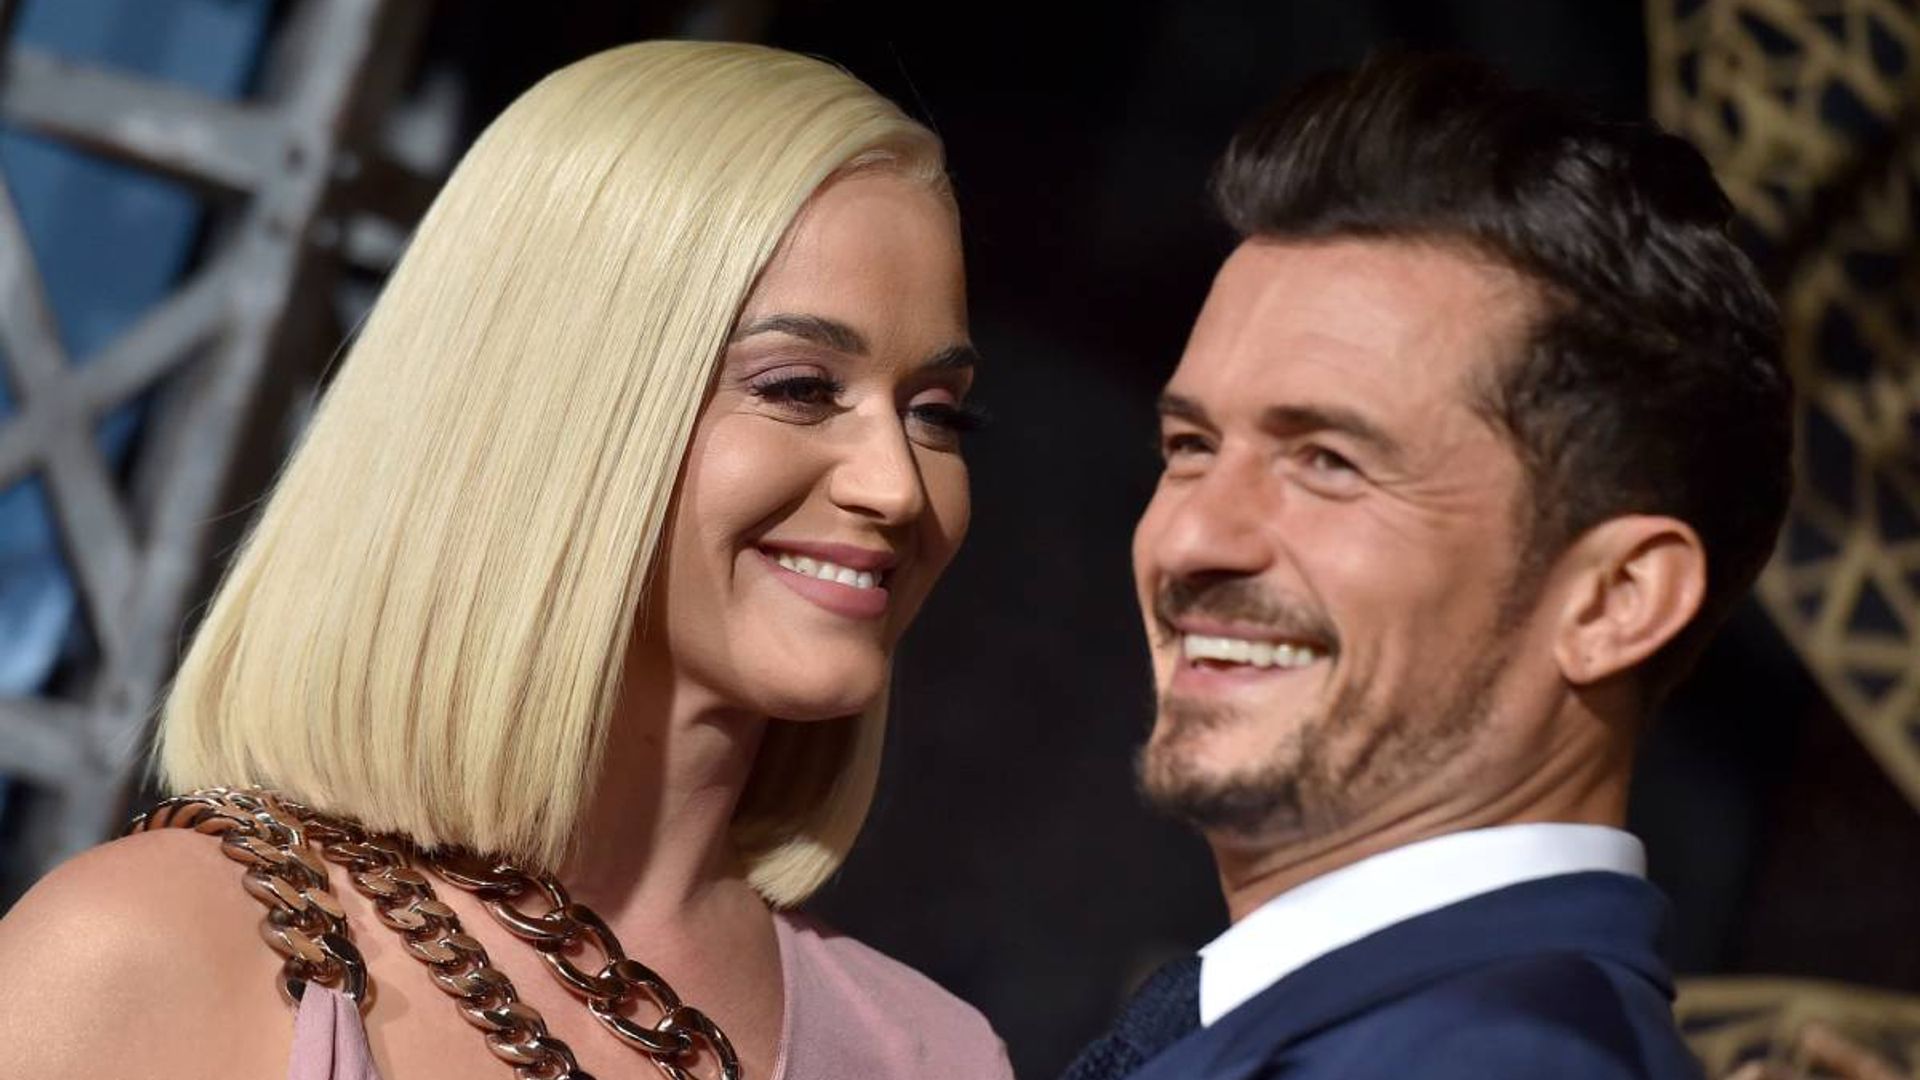 Katy Perry shares video from labour with baby Daisy - and Orlando Bloom is the sweetest